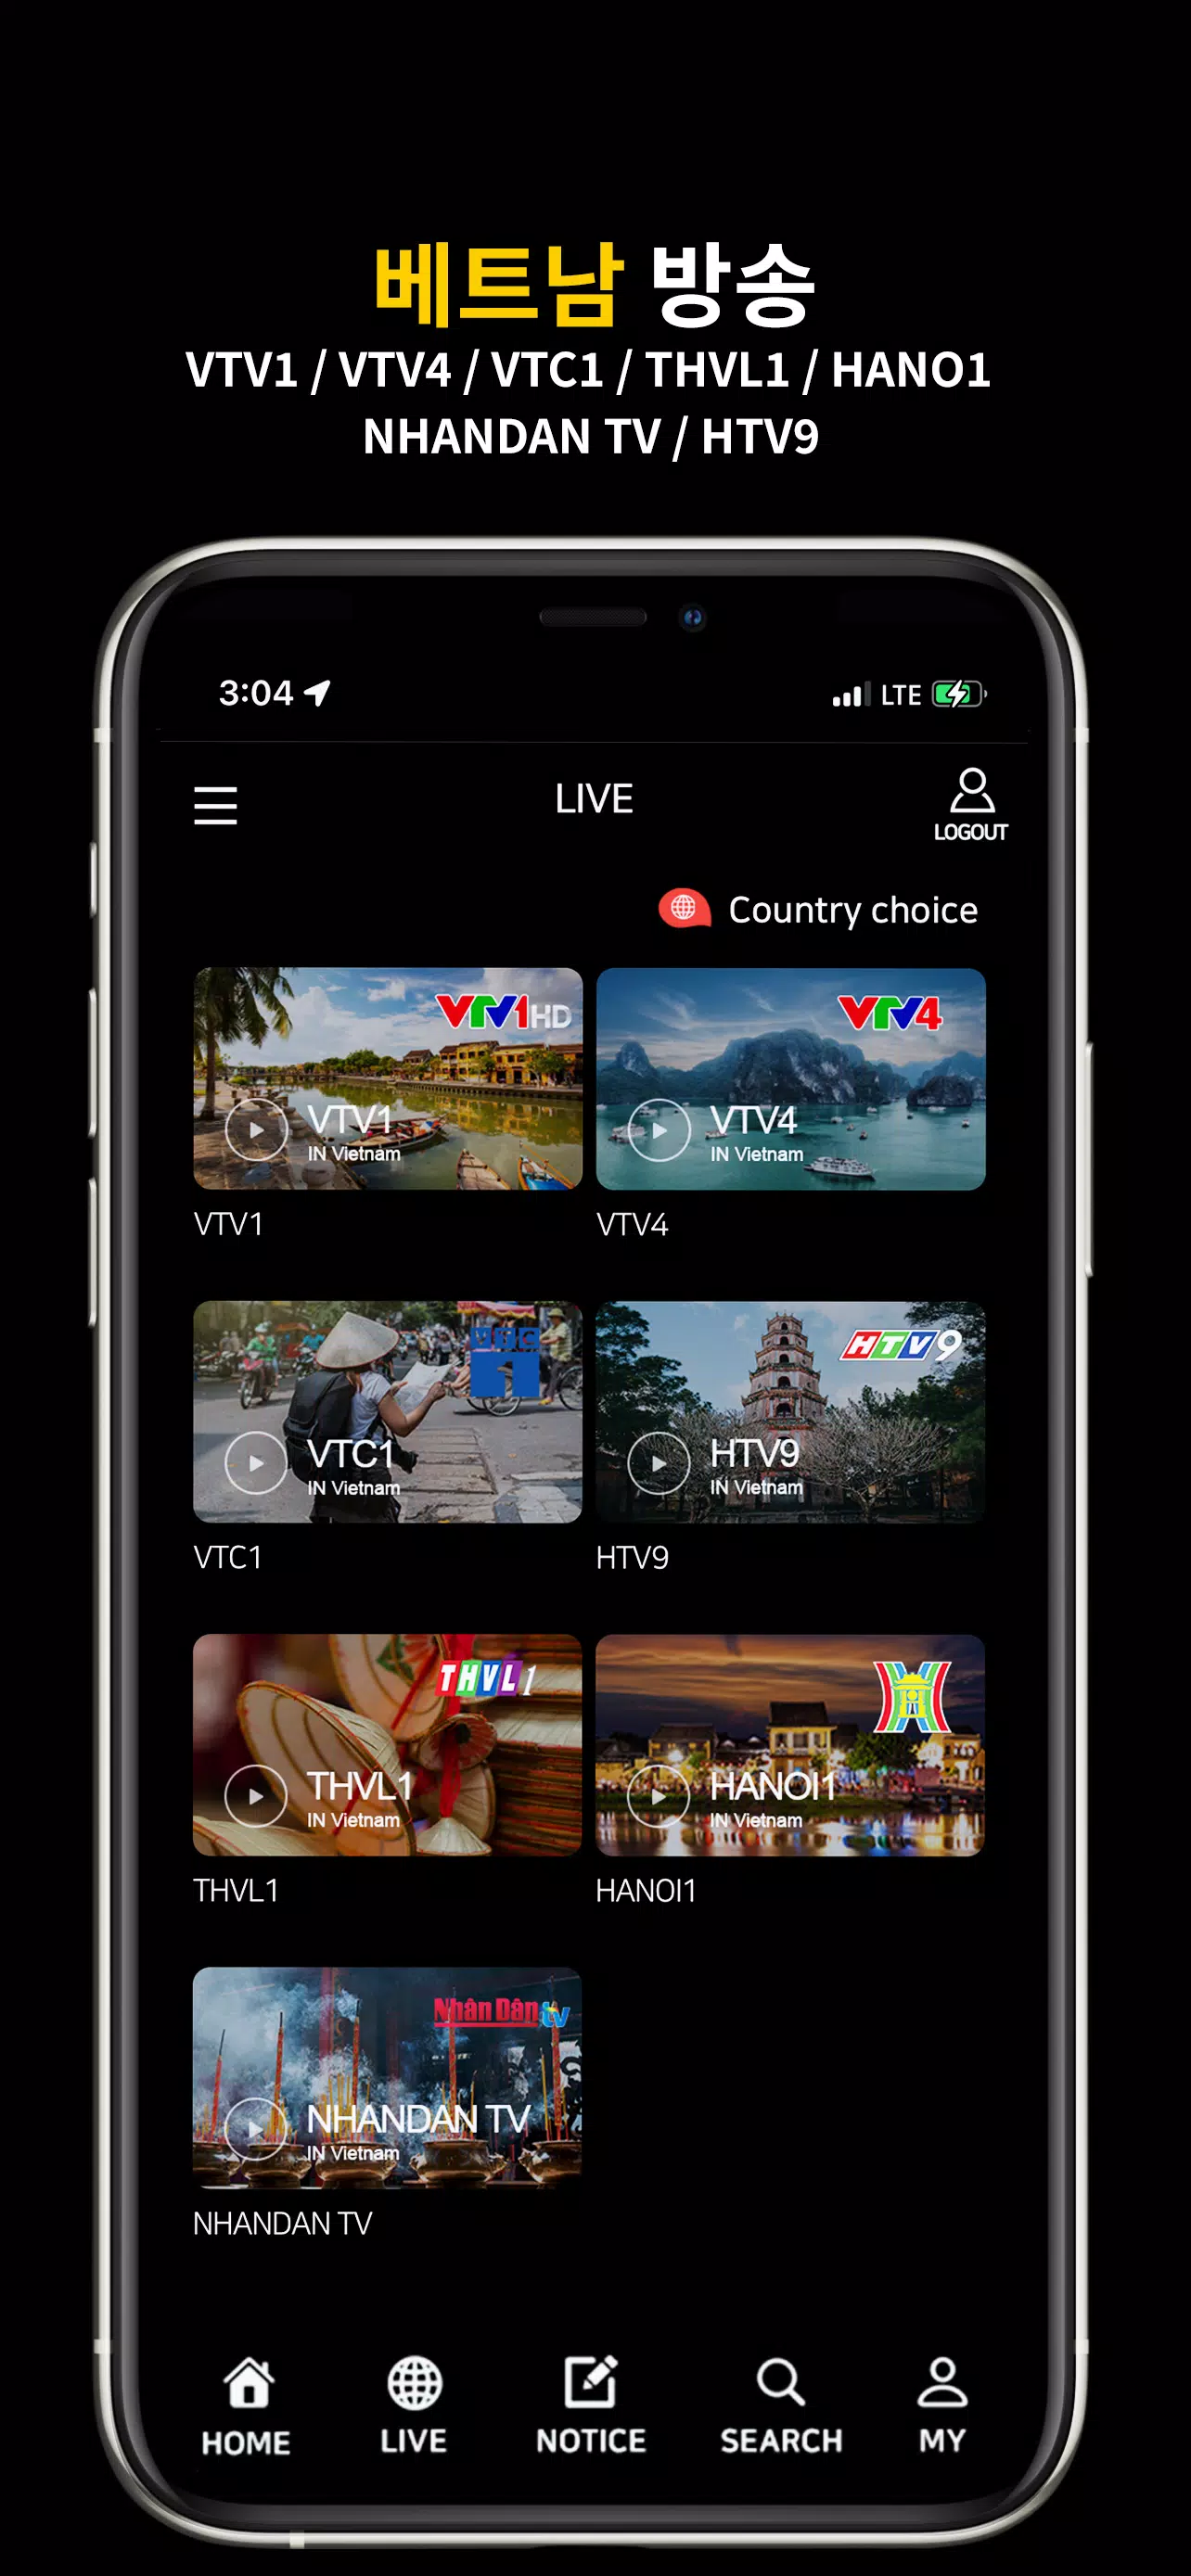 Download My Asian TV App Android Advice APK for Android, Run